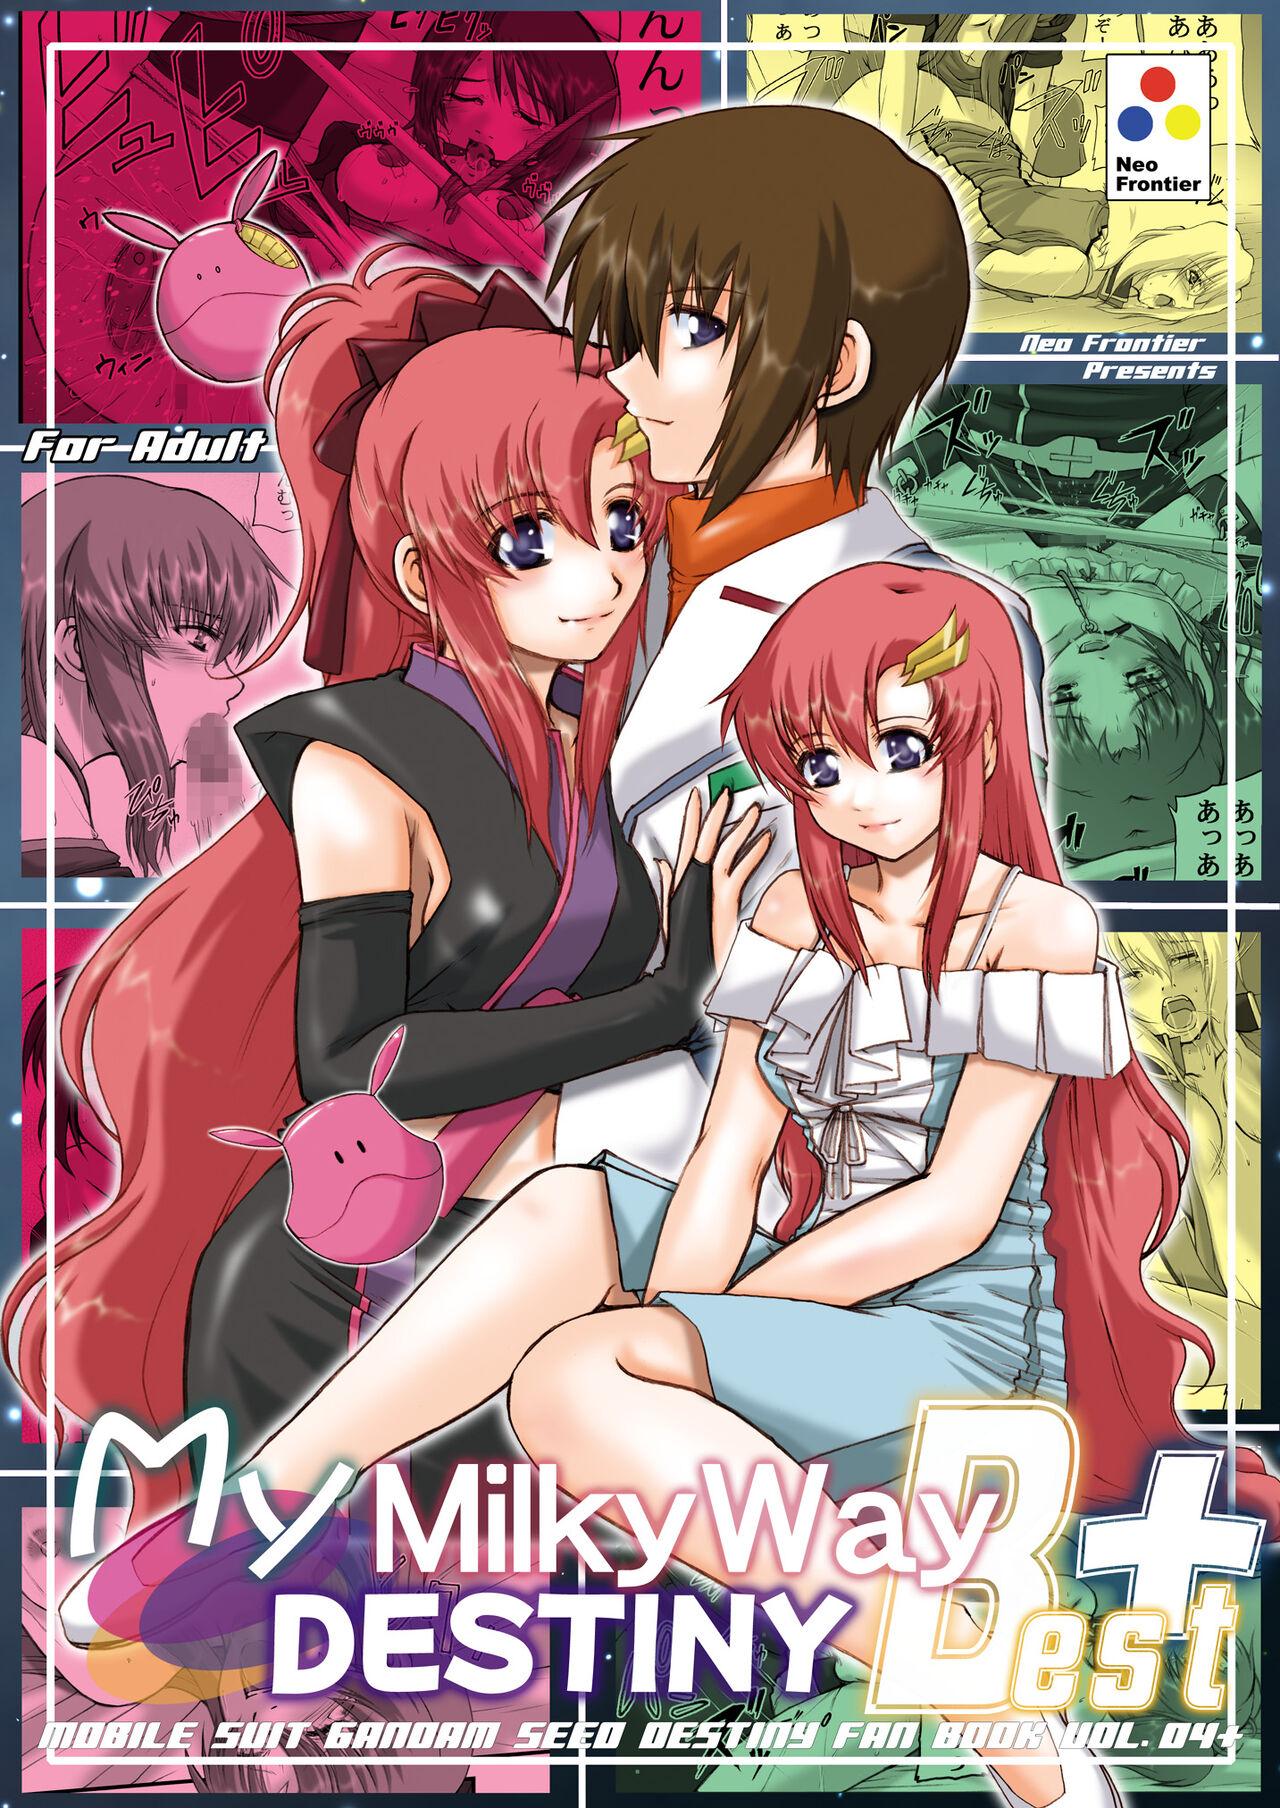 Coeds My Milky Way DESTINY Best+ - Gundam seed Workout - Picture 1